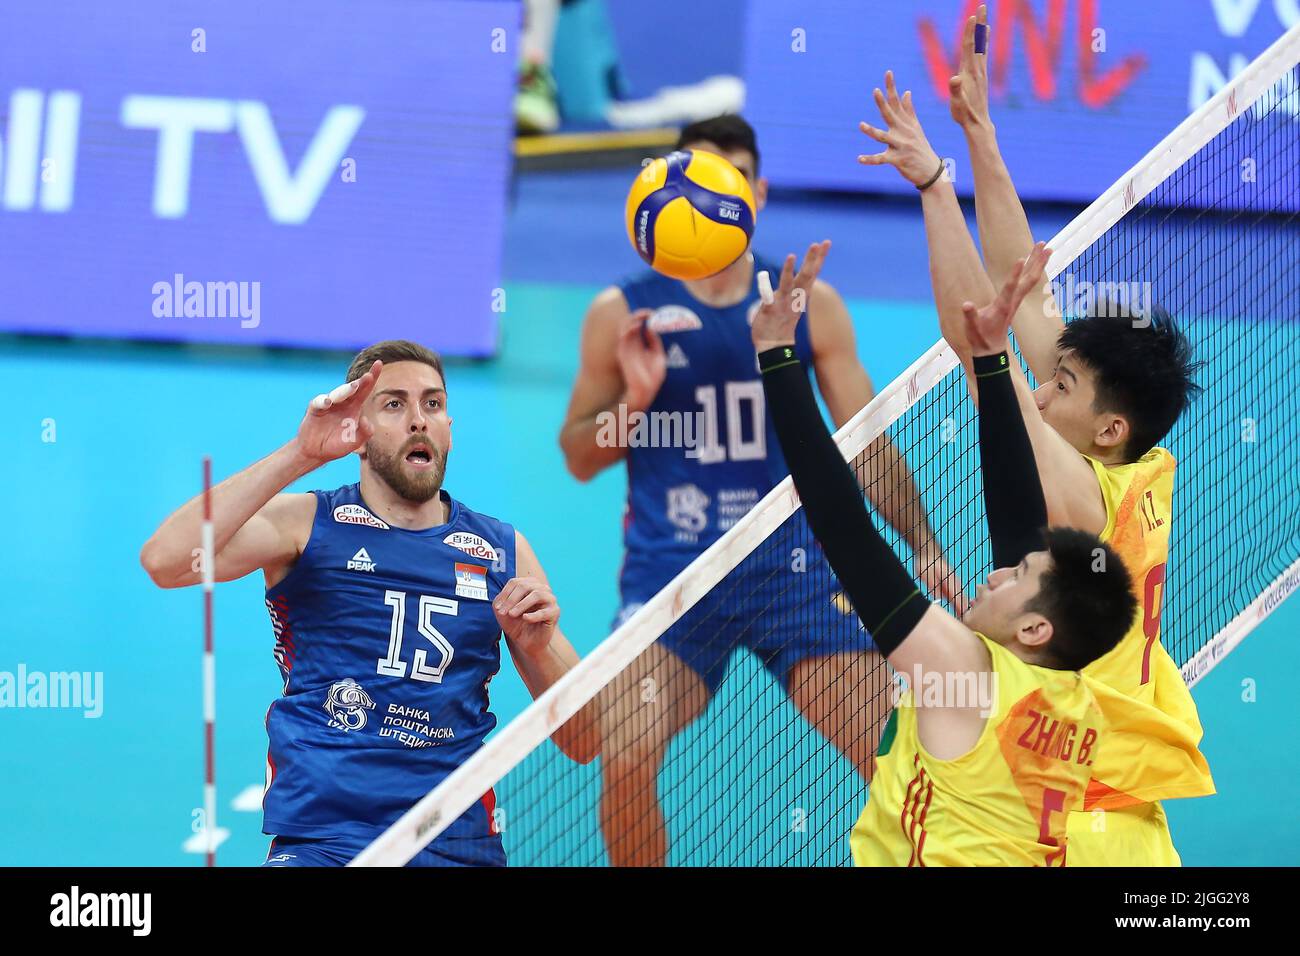 Nemanja Masulovic during the FIVB Volleyball Nations League Mens Pool 6 match between China and Serbia in Gdansk, Poland on July 10, 2022